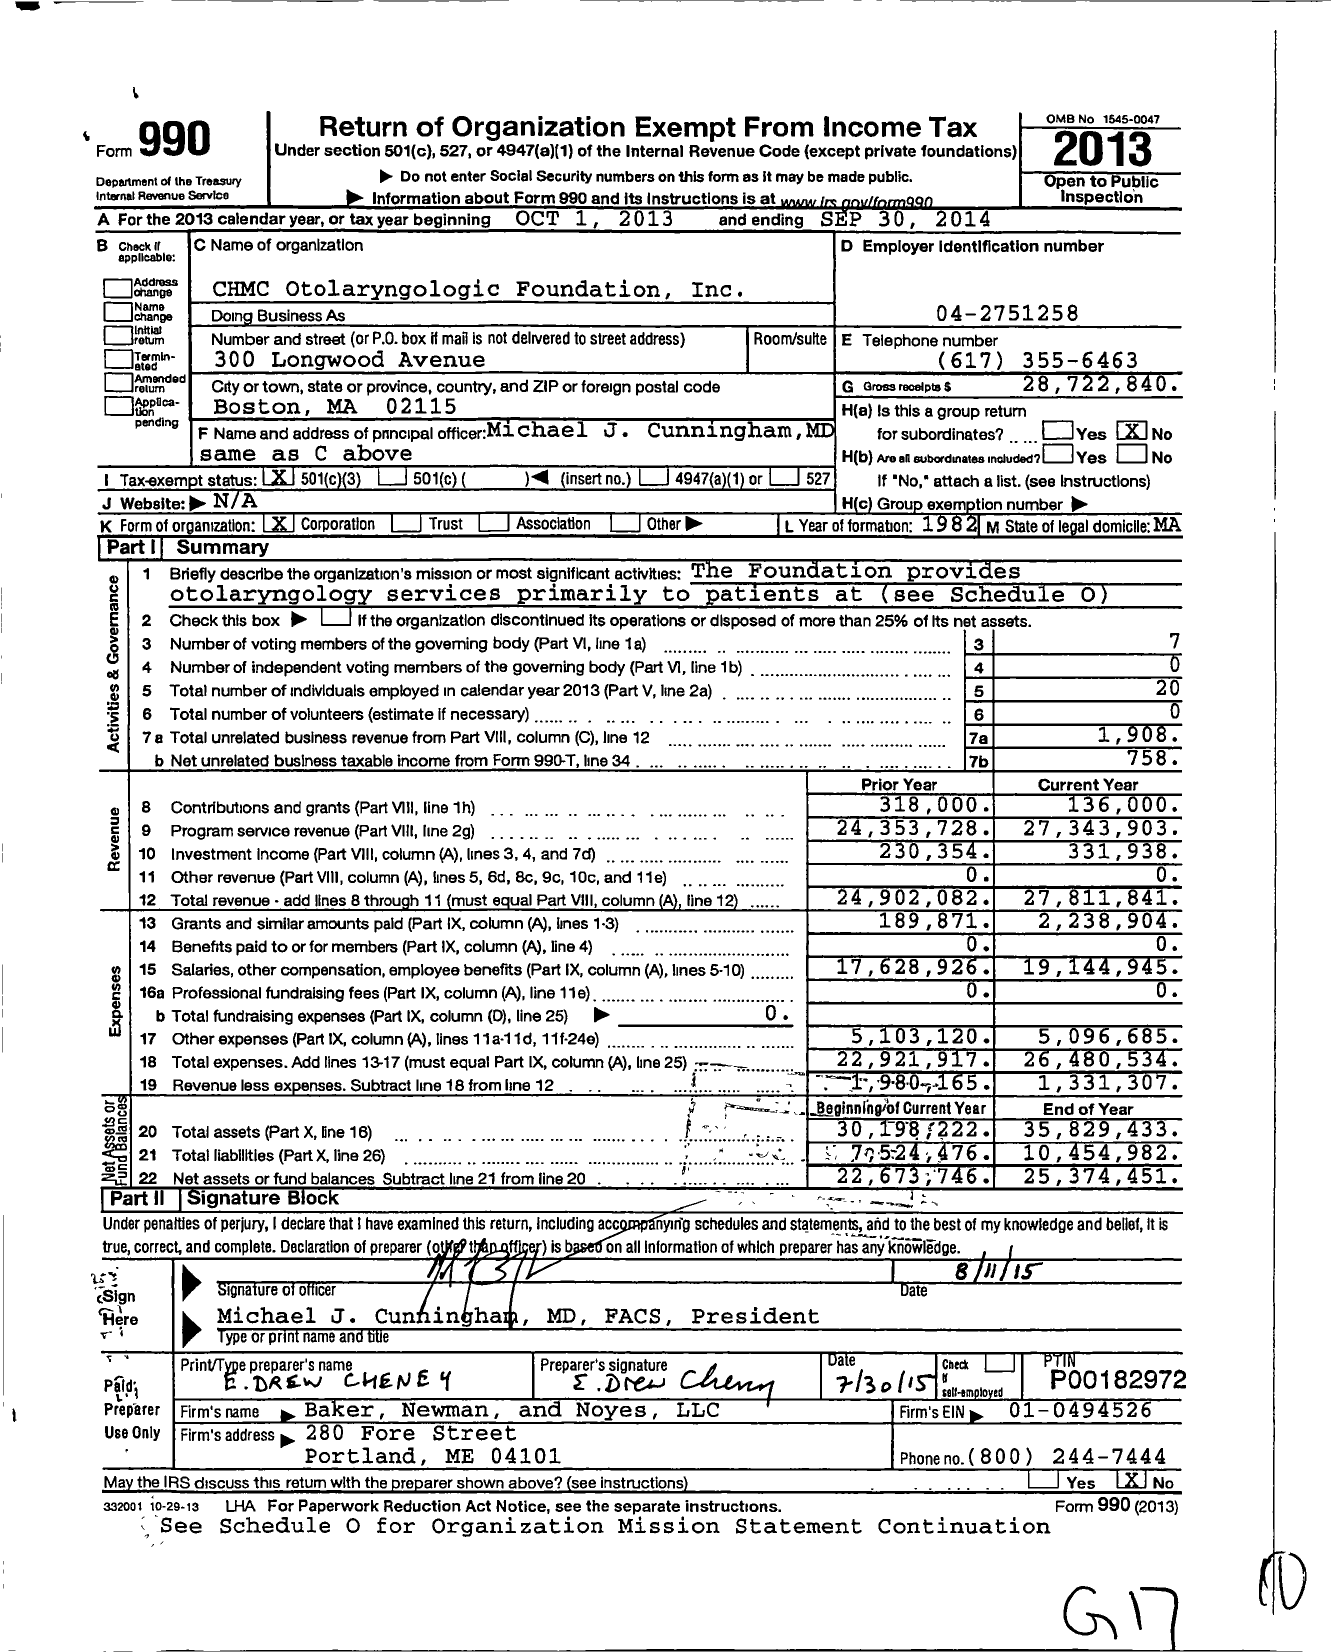 Image of first page of 2013 Form 990 for CHMC Otolaryngologic Foundation